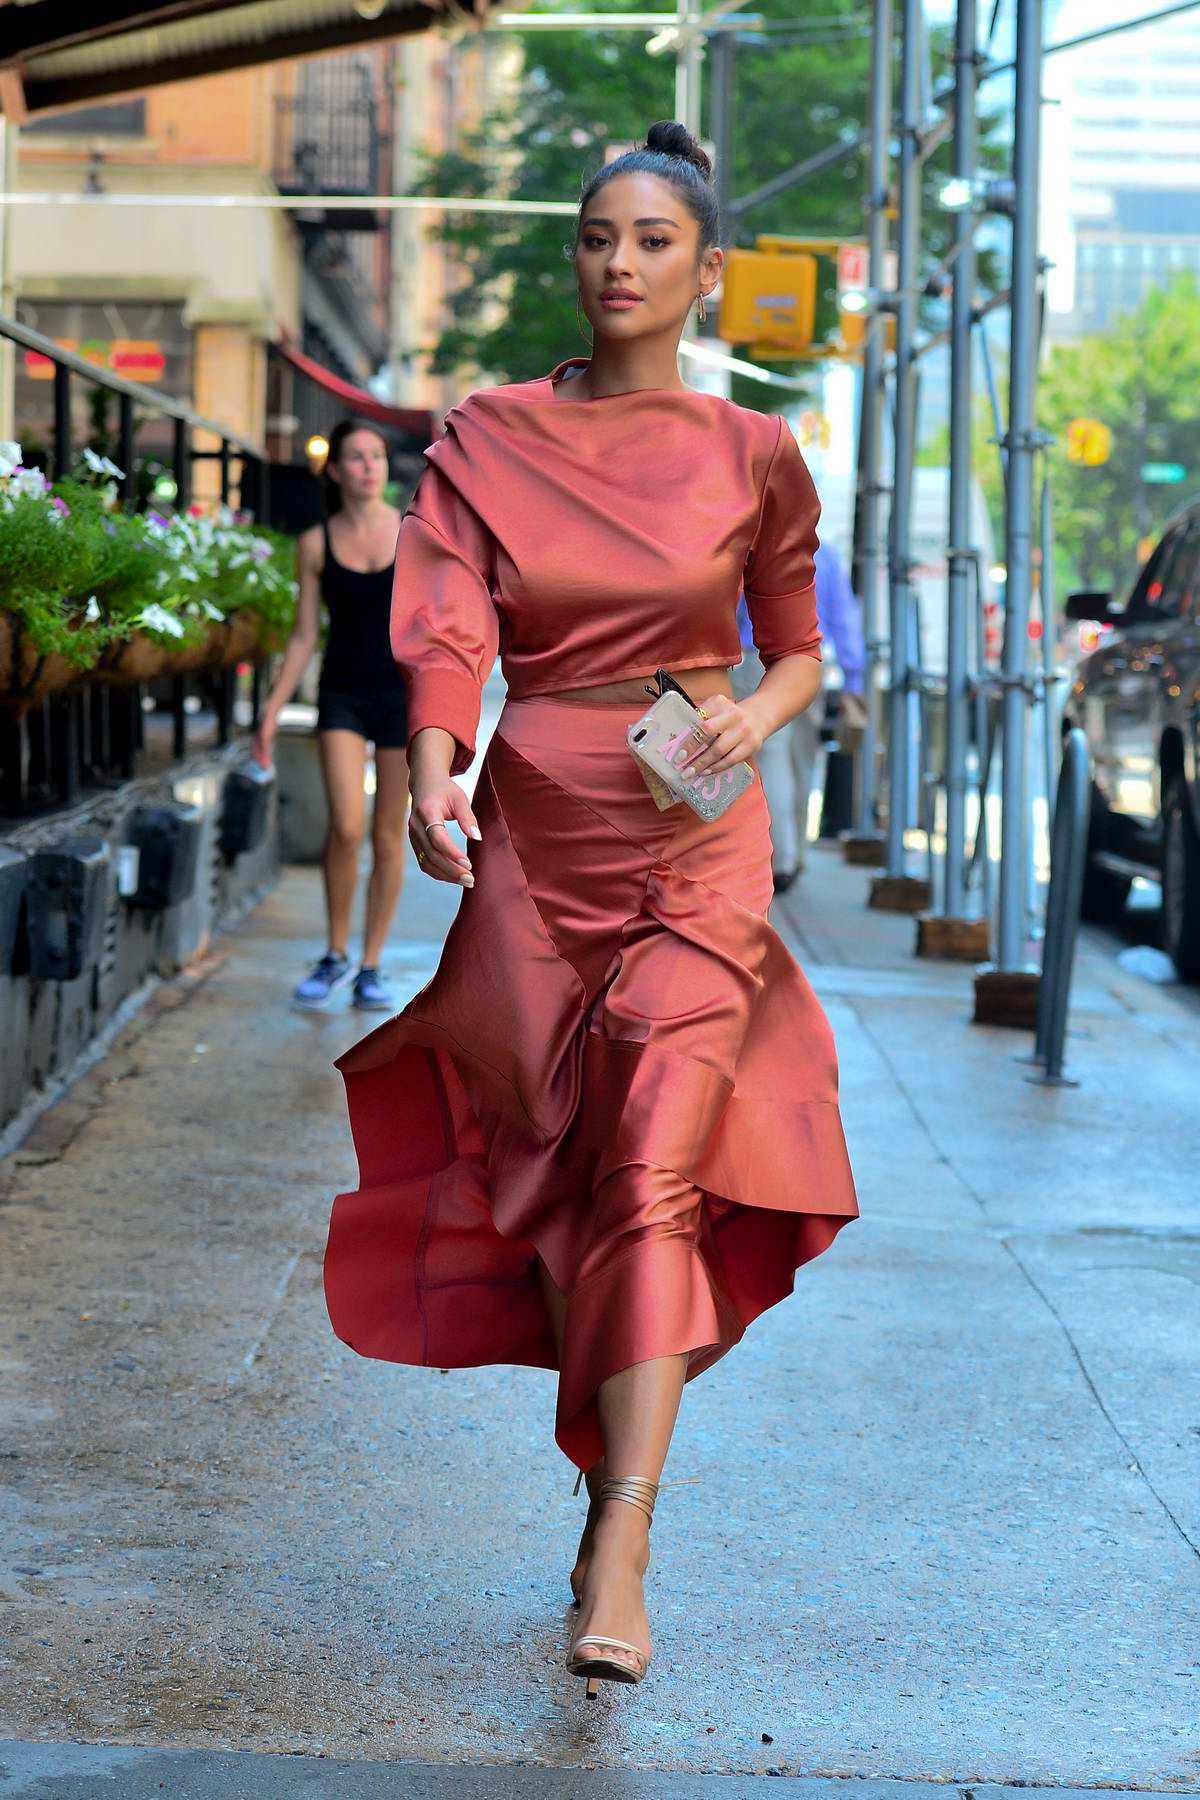 shay mitchell looks stylish in a coral orange dress while heading out ...